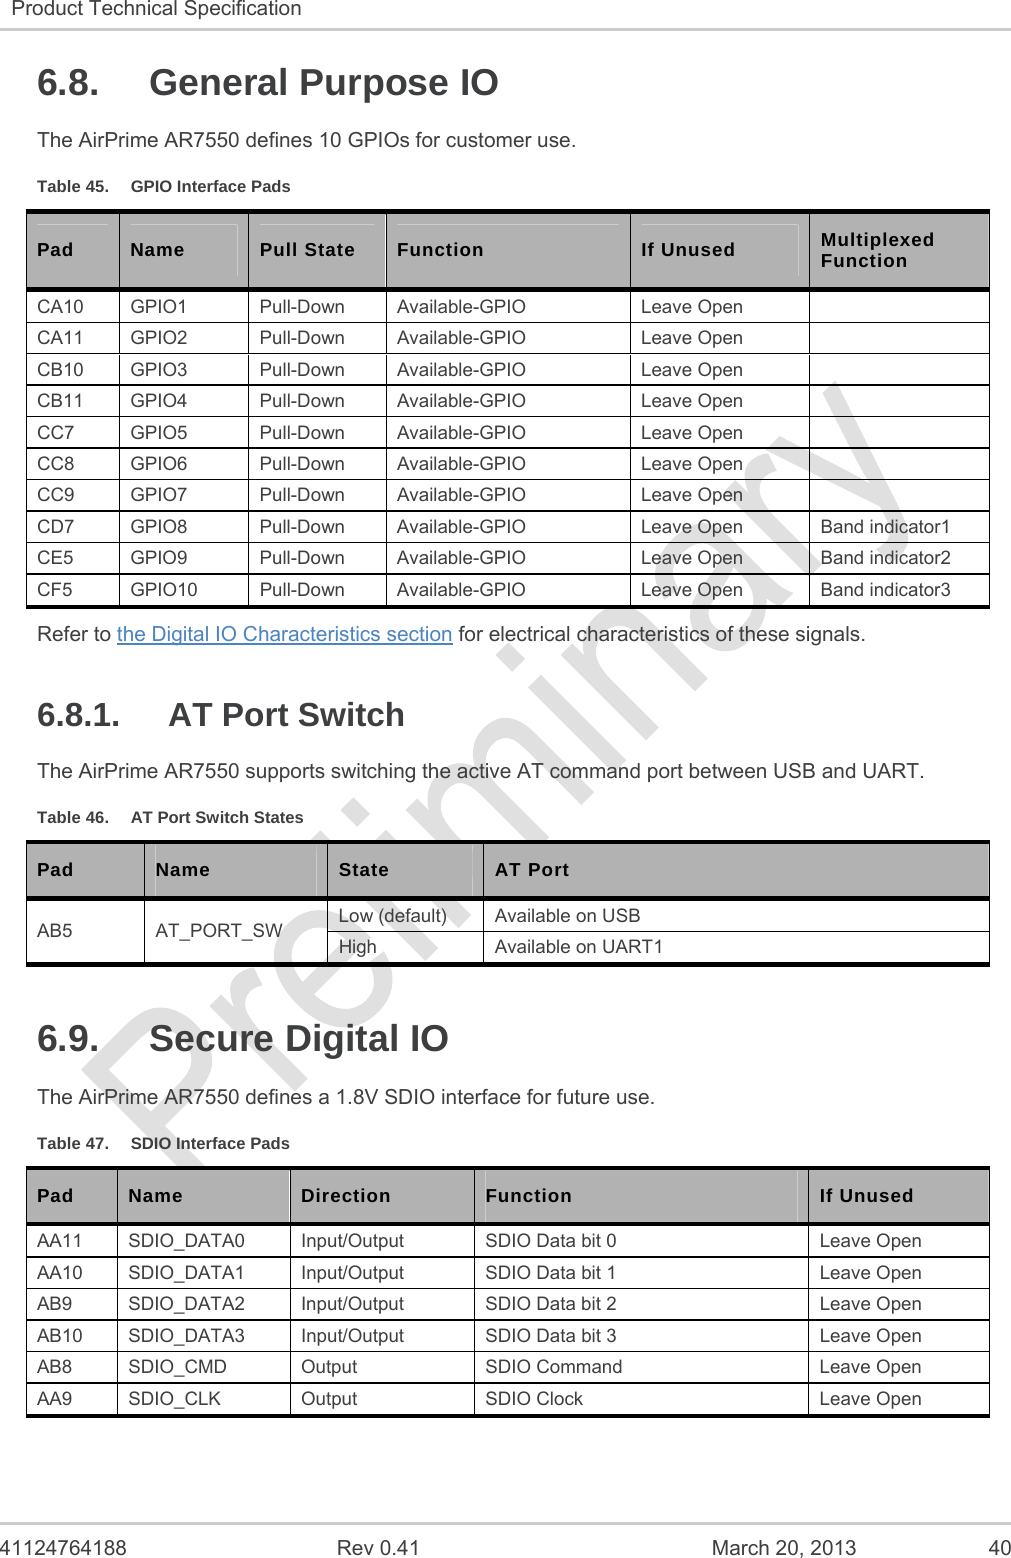   41124764188  Rev 0.41  March 20, 2013  40 Product Technical Specification   6.8.  General Purpose IO The AirPrime AR7550 defines 10 GPIOs for customer use. Table 45.  GPIO Interface Pads Pad  Name  Pull State  Function  If Unused  Multiplexed Function CA10 GPIO1  Pull-Down  Available-GPIO  Leave Open   CA11 GPIO2  Pull-Down  Available-GPIO  Leave Open   CB10 GPIO3  Pull-Down  Available-GPIO  Leave Open   CB11 GPIO4  Pull-Down  Available-GPIO  Leave Open   CC7 GPIO5  Pull-Down Available-GPIO  Leave Open   CC8 GPIO6  Pull-Down Available-GPIO  Leave Open   CC9 GPIO7  Pull-Down Available-GPIO  Leave Open   CD7  GPIO8  Pull-Down  Available-GPIO  Leave Open  Band indicator1 CE5  GPIO9  Pull-Down  Available-GPIO  Leave Open  Band indicator2 CF5  GPIO10  Pull-Down  Available-GPIO  Leave Open  Band indicator3 Refer to the Digital IO Characteristics section for electrical characteristics of these signals. 6.8.1.  AT Port Switch The AirPrime AR7550 supports switching the active AT command port between USB and UART. Table 46.  AT Port Switch States Pad  Name  State  AT Port AB5 AT_PORT_SW Low (default)  Available on USB High  Available on UART1 6.9.  Secure Digital IO The AirPrime AR7550 defines a 1.8V SDIO interface for future use. Table 47.  SDIO Interface Pads Pad  Name  Direction  Function  If Unused AA11  SDIO_DATA0  Input/Output  SDIO Data bit 0  Leave Open AA10  SDIO_DATA1  Input/Output  SDIO Data bit 1  Leave Open AB9  SDIO_DATA2  Input/Output  SDIO Data bit 2  Leave Open AB10  SDIO_DATA3  Input/Output  SDIO Data bit 3  Leave Open AB8  SDIO_CMD  Output  SDIO Command  Leave Open AA9  SDIO_CLK  Output  SDIO Clock  Leave Open   